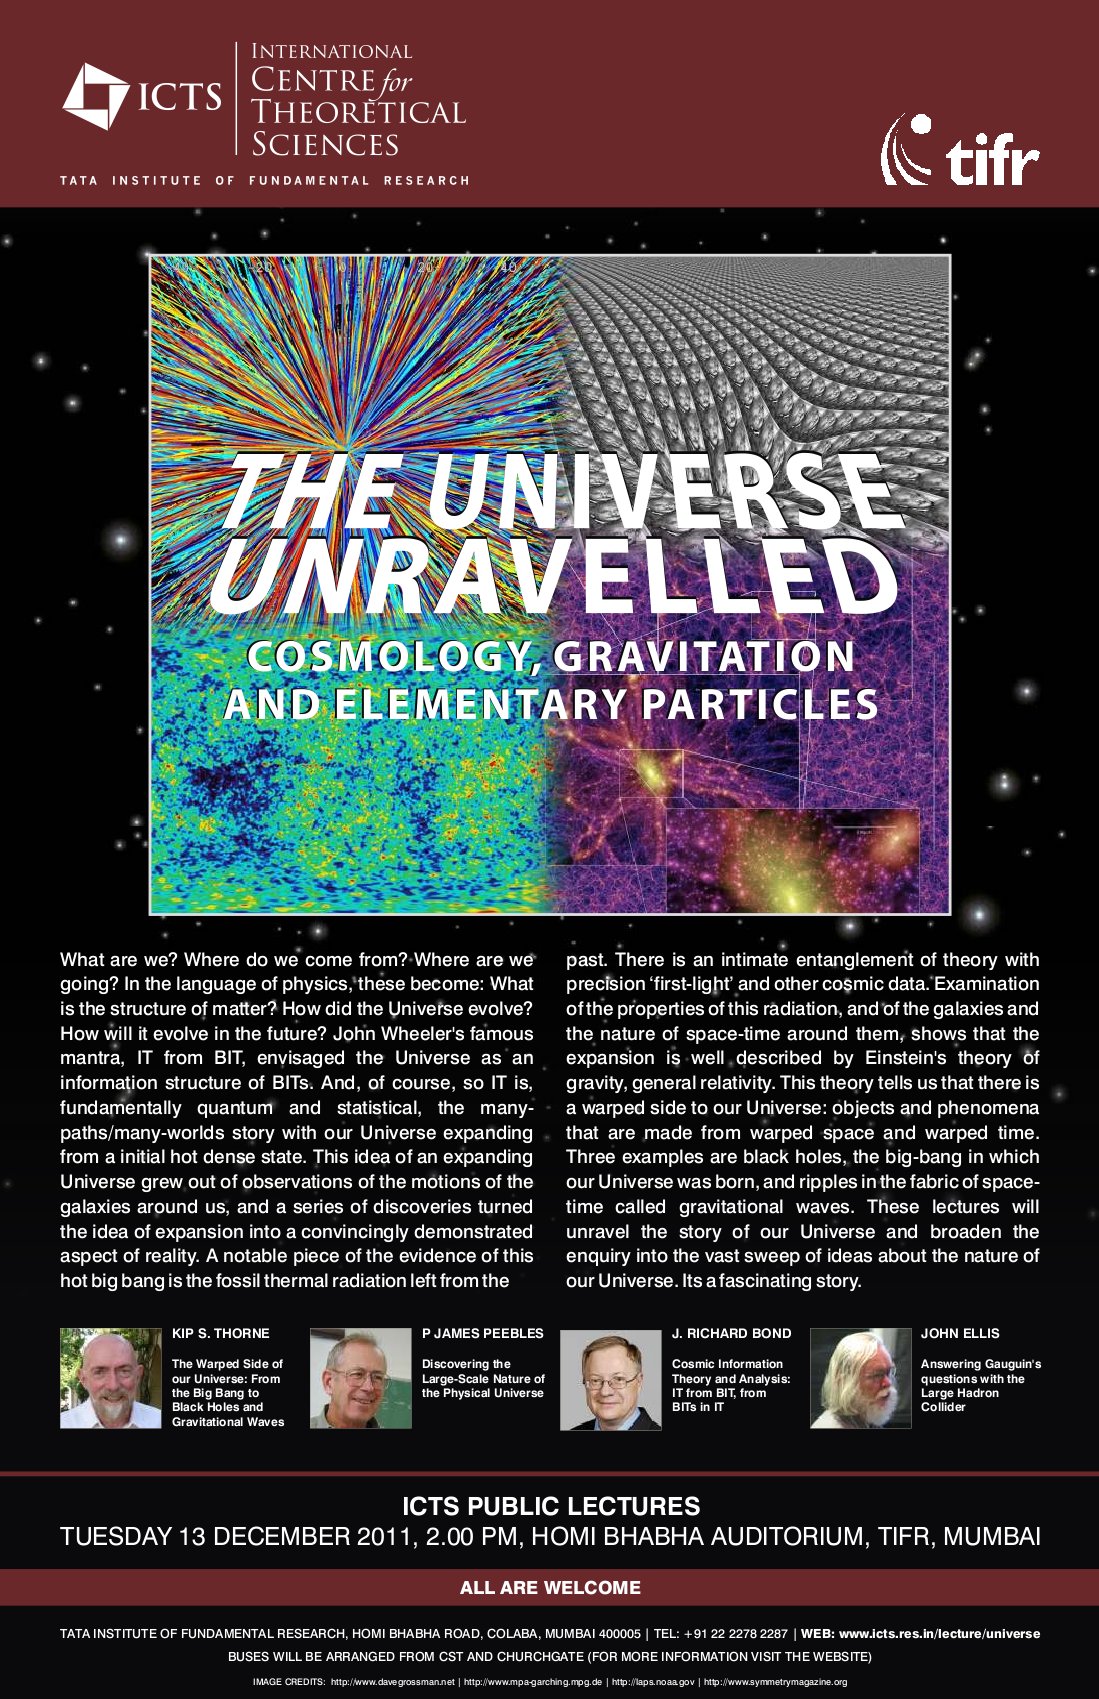 The Universe Unravelled Comology, Gravitation and Elementary Particles ...